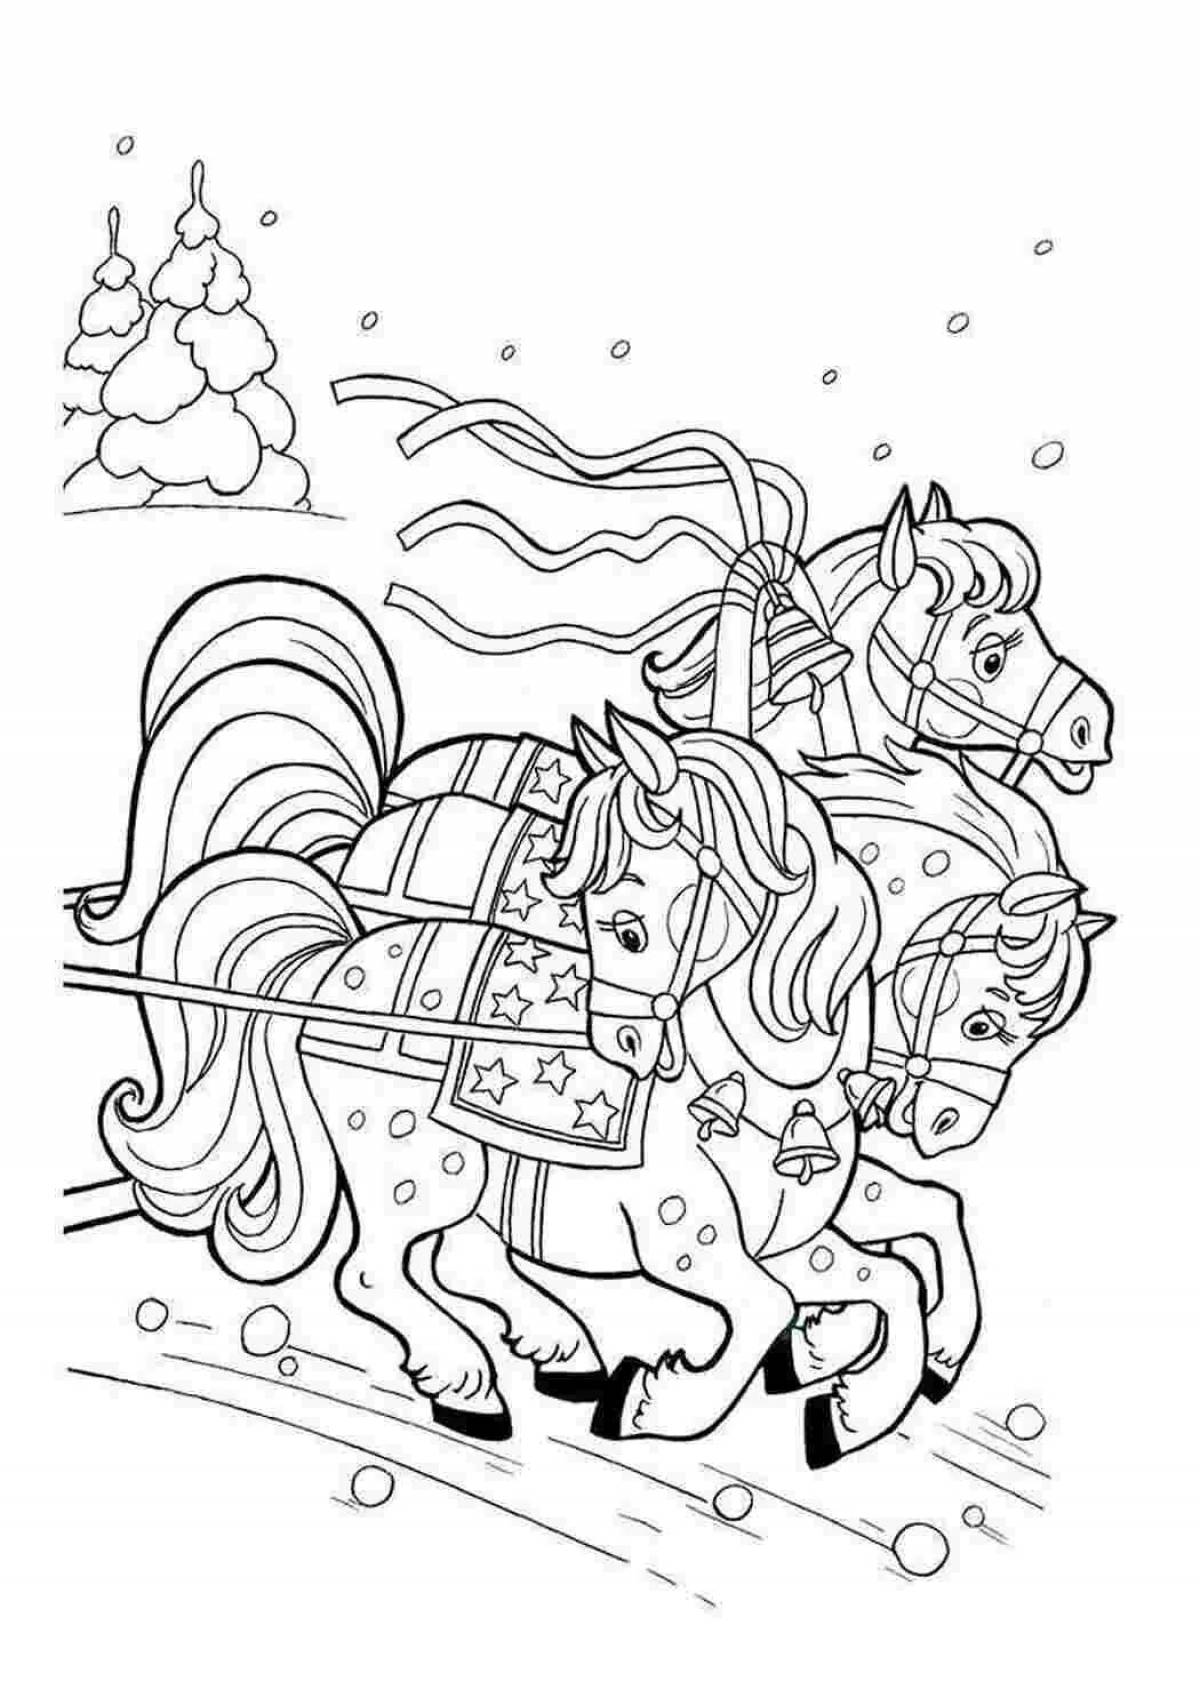 Coloring page magnanimous trio of horses